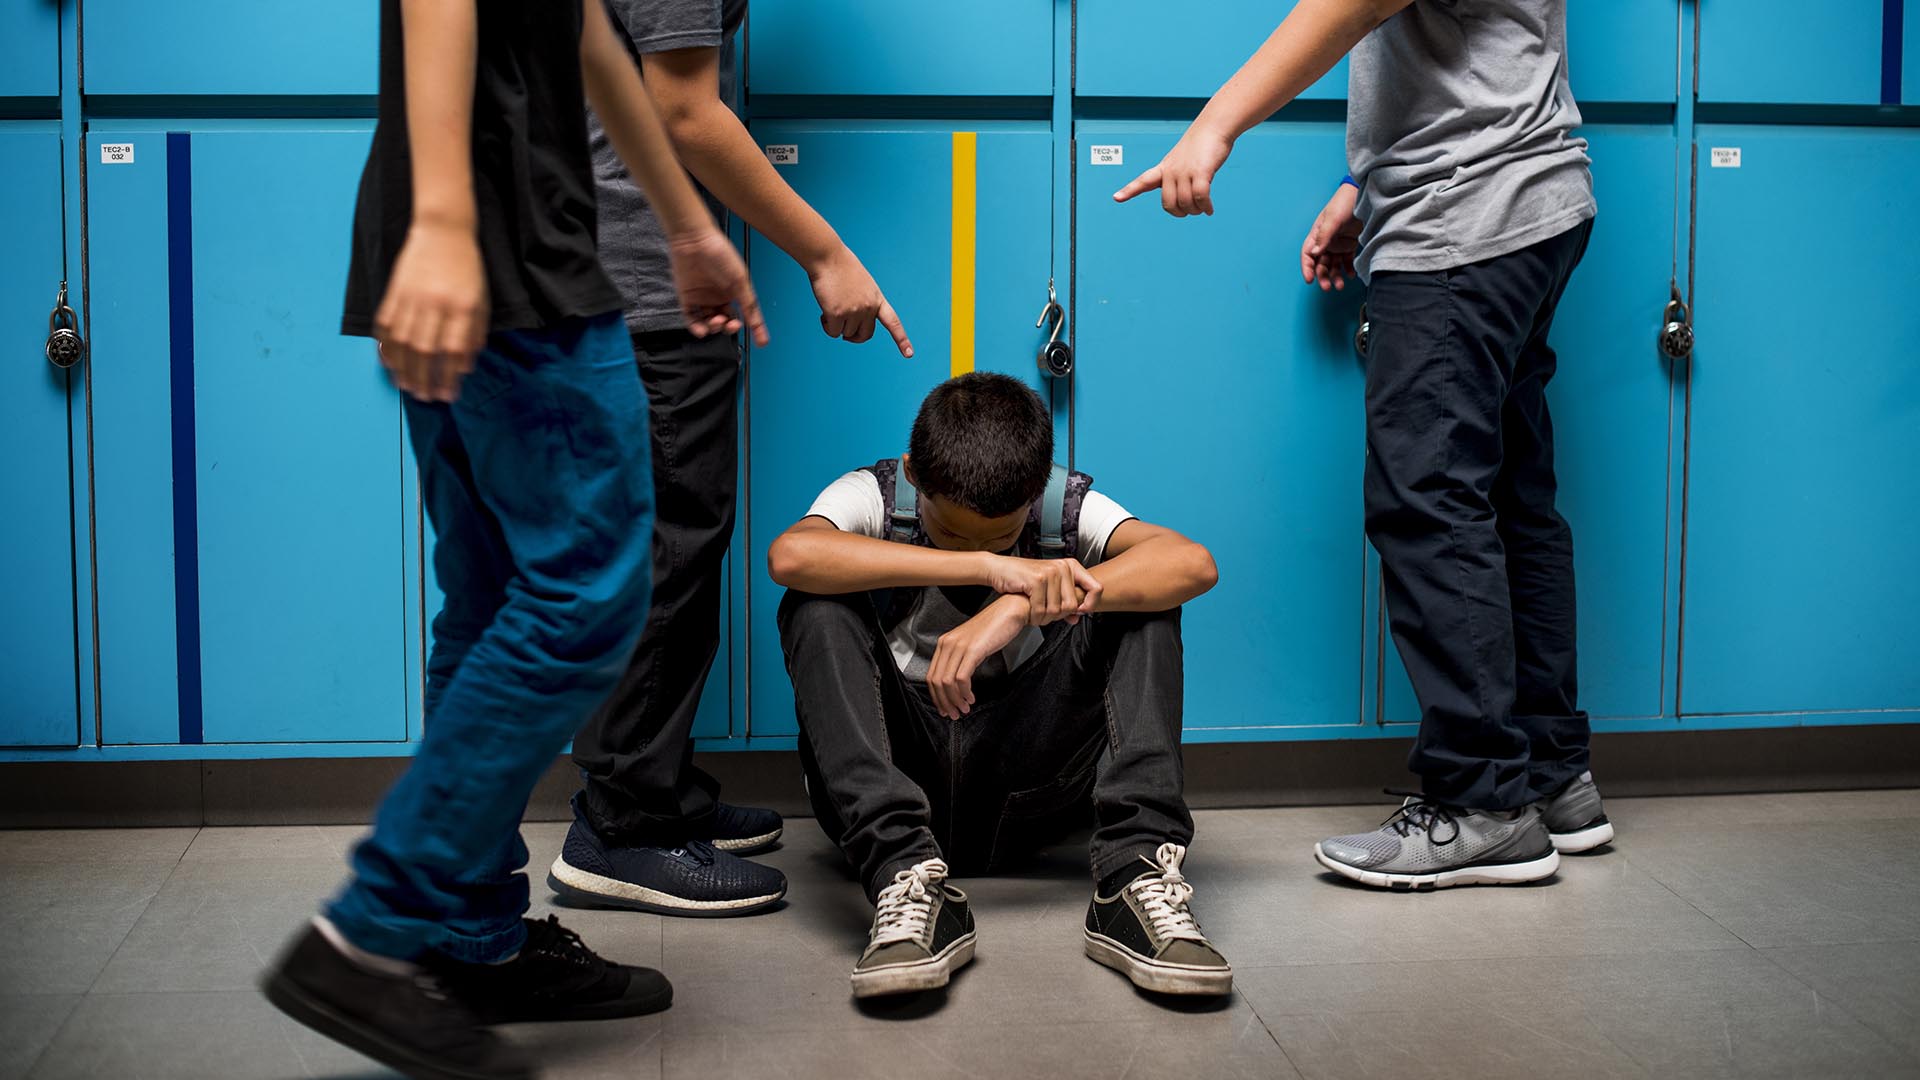 Eight tips for talking to your kids about bullying